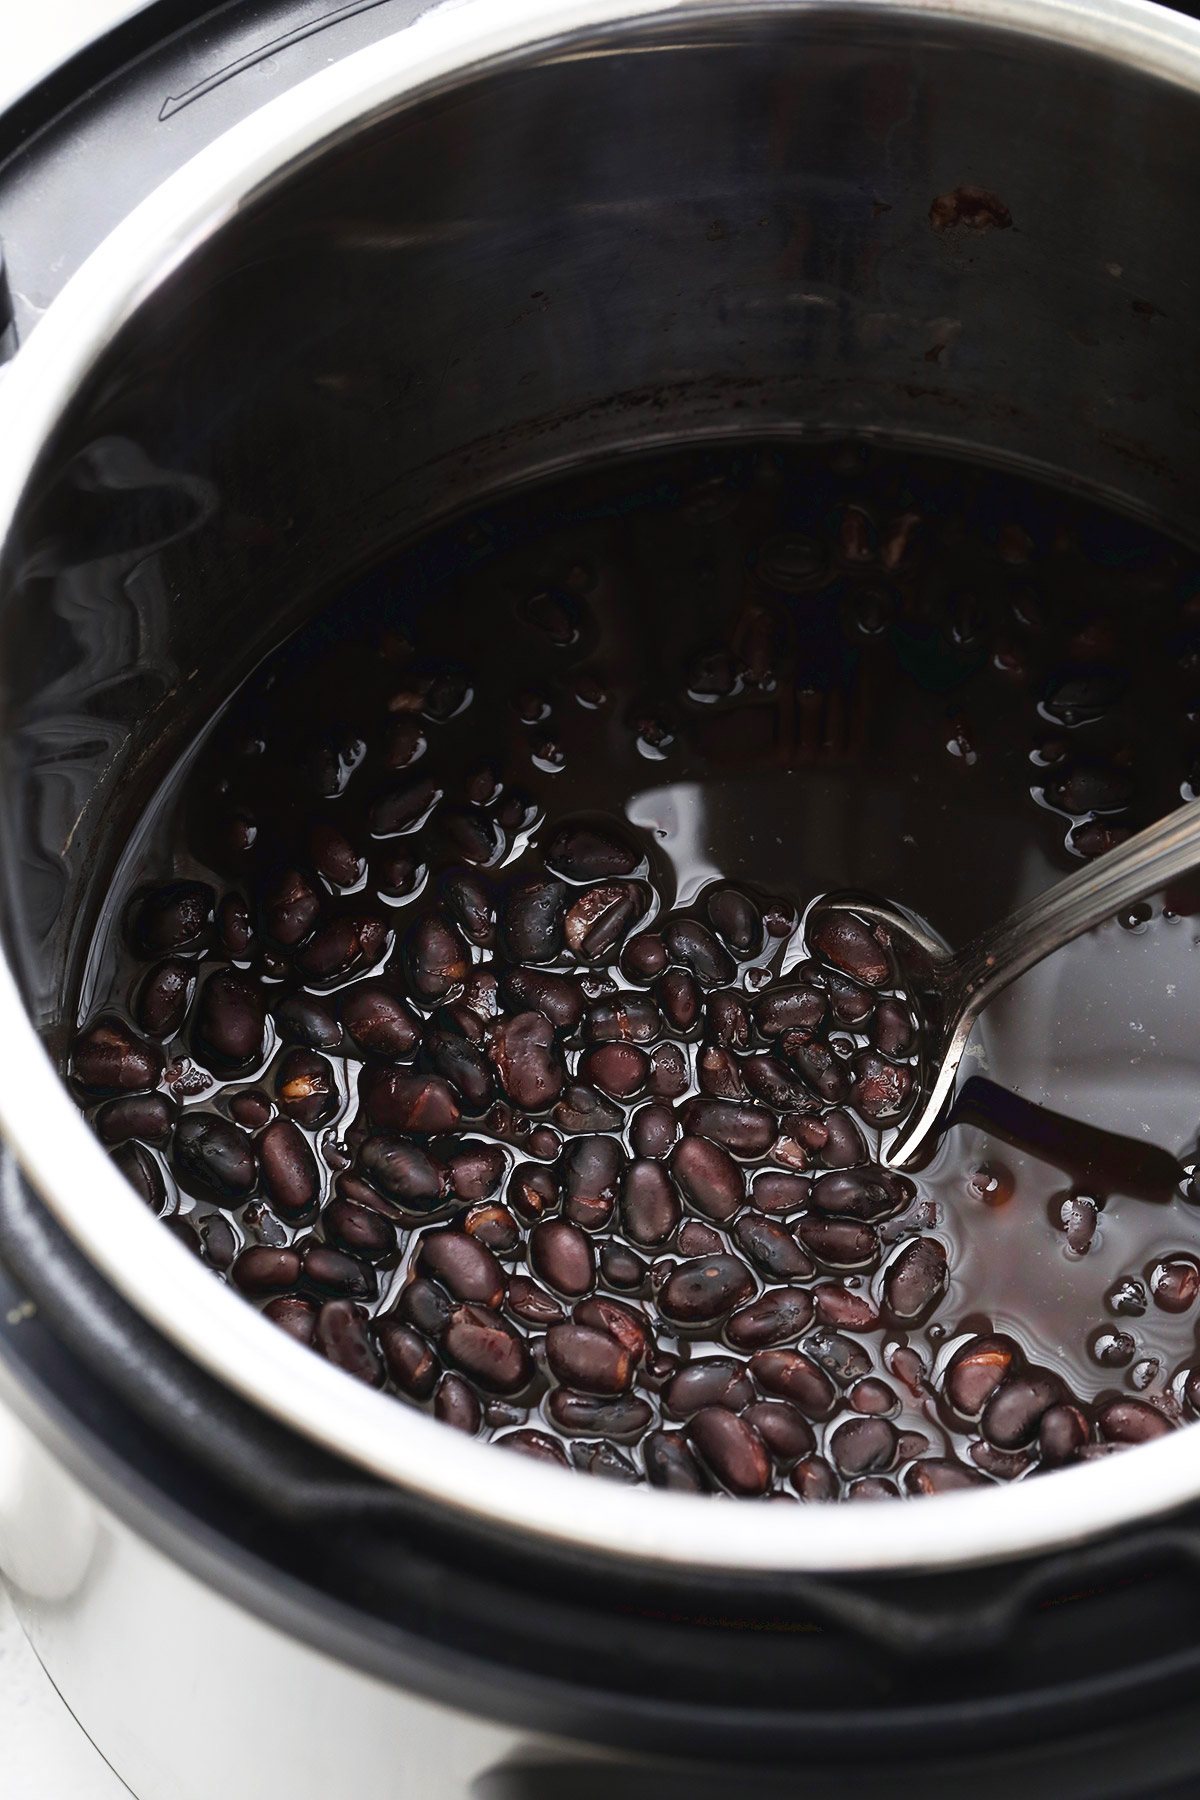 No Soak Instant Pot Black Beans from One Lovely Life